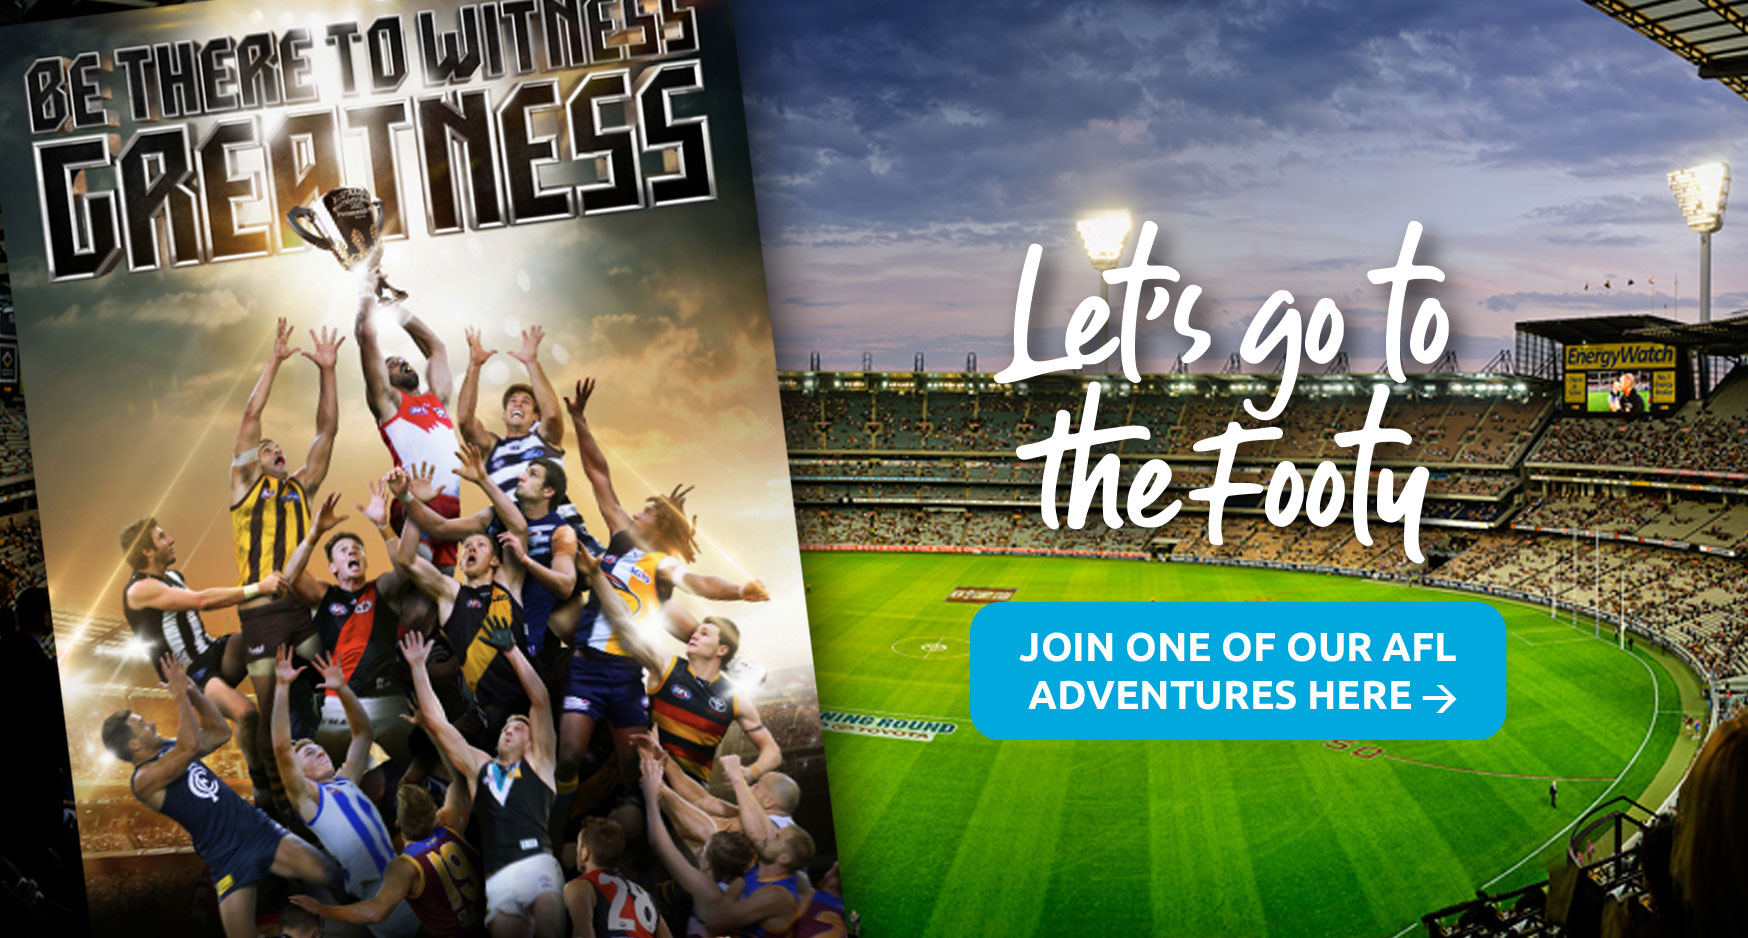 Let's go to the footy. Click here to join one of our adventures.